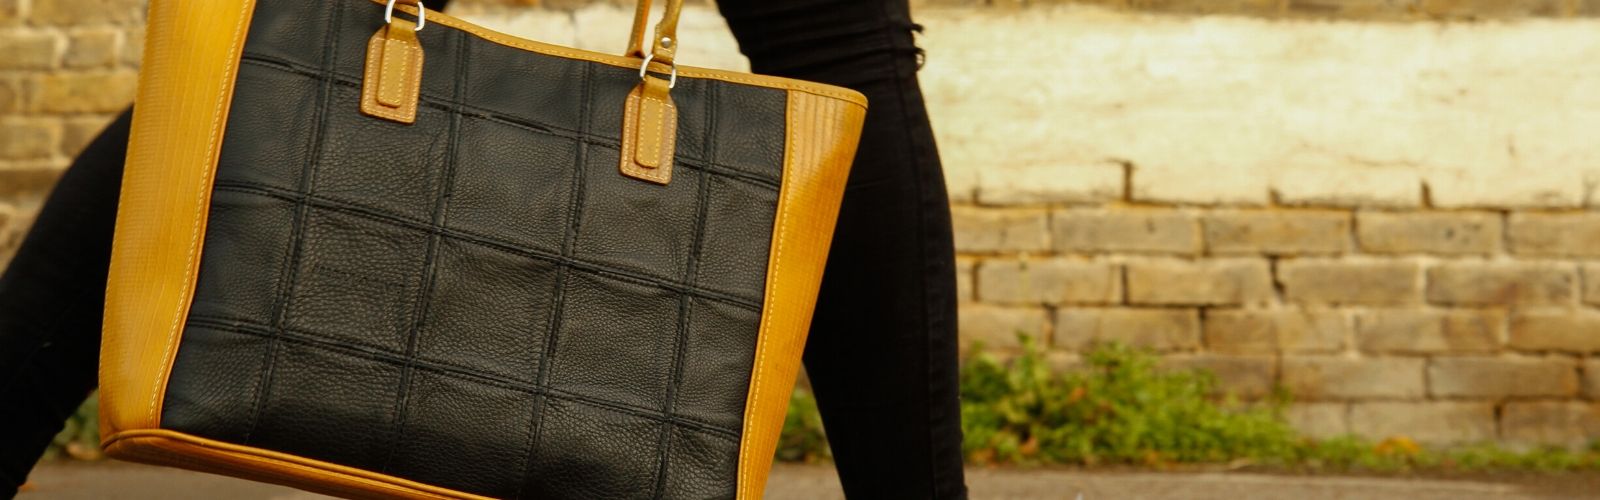 Sustainable and Ethical Tote Bags - Elvis & Kresse